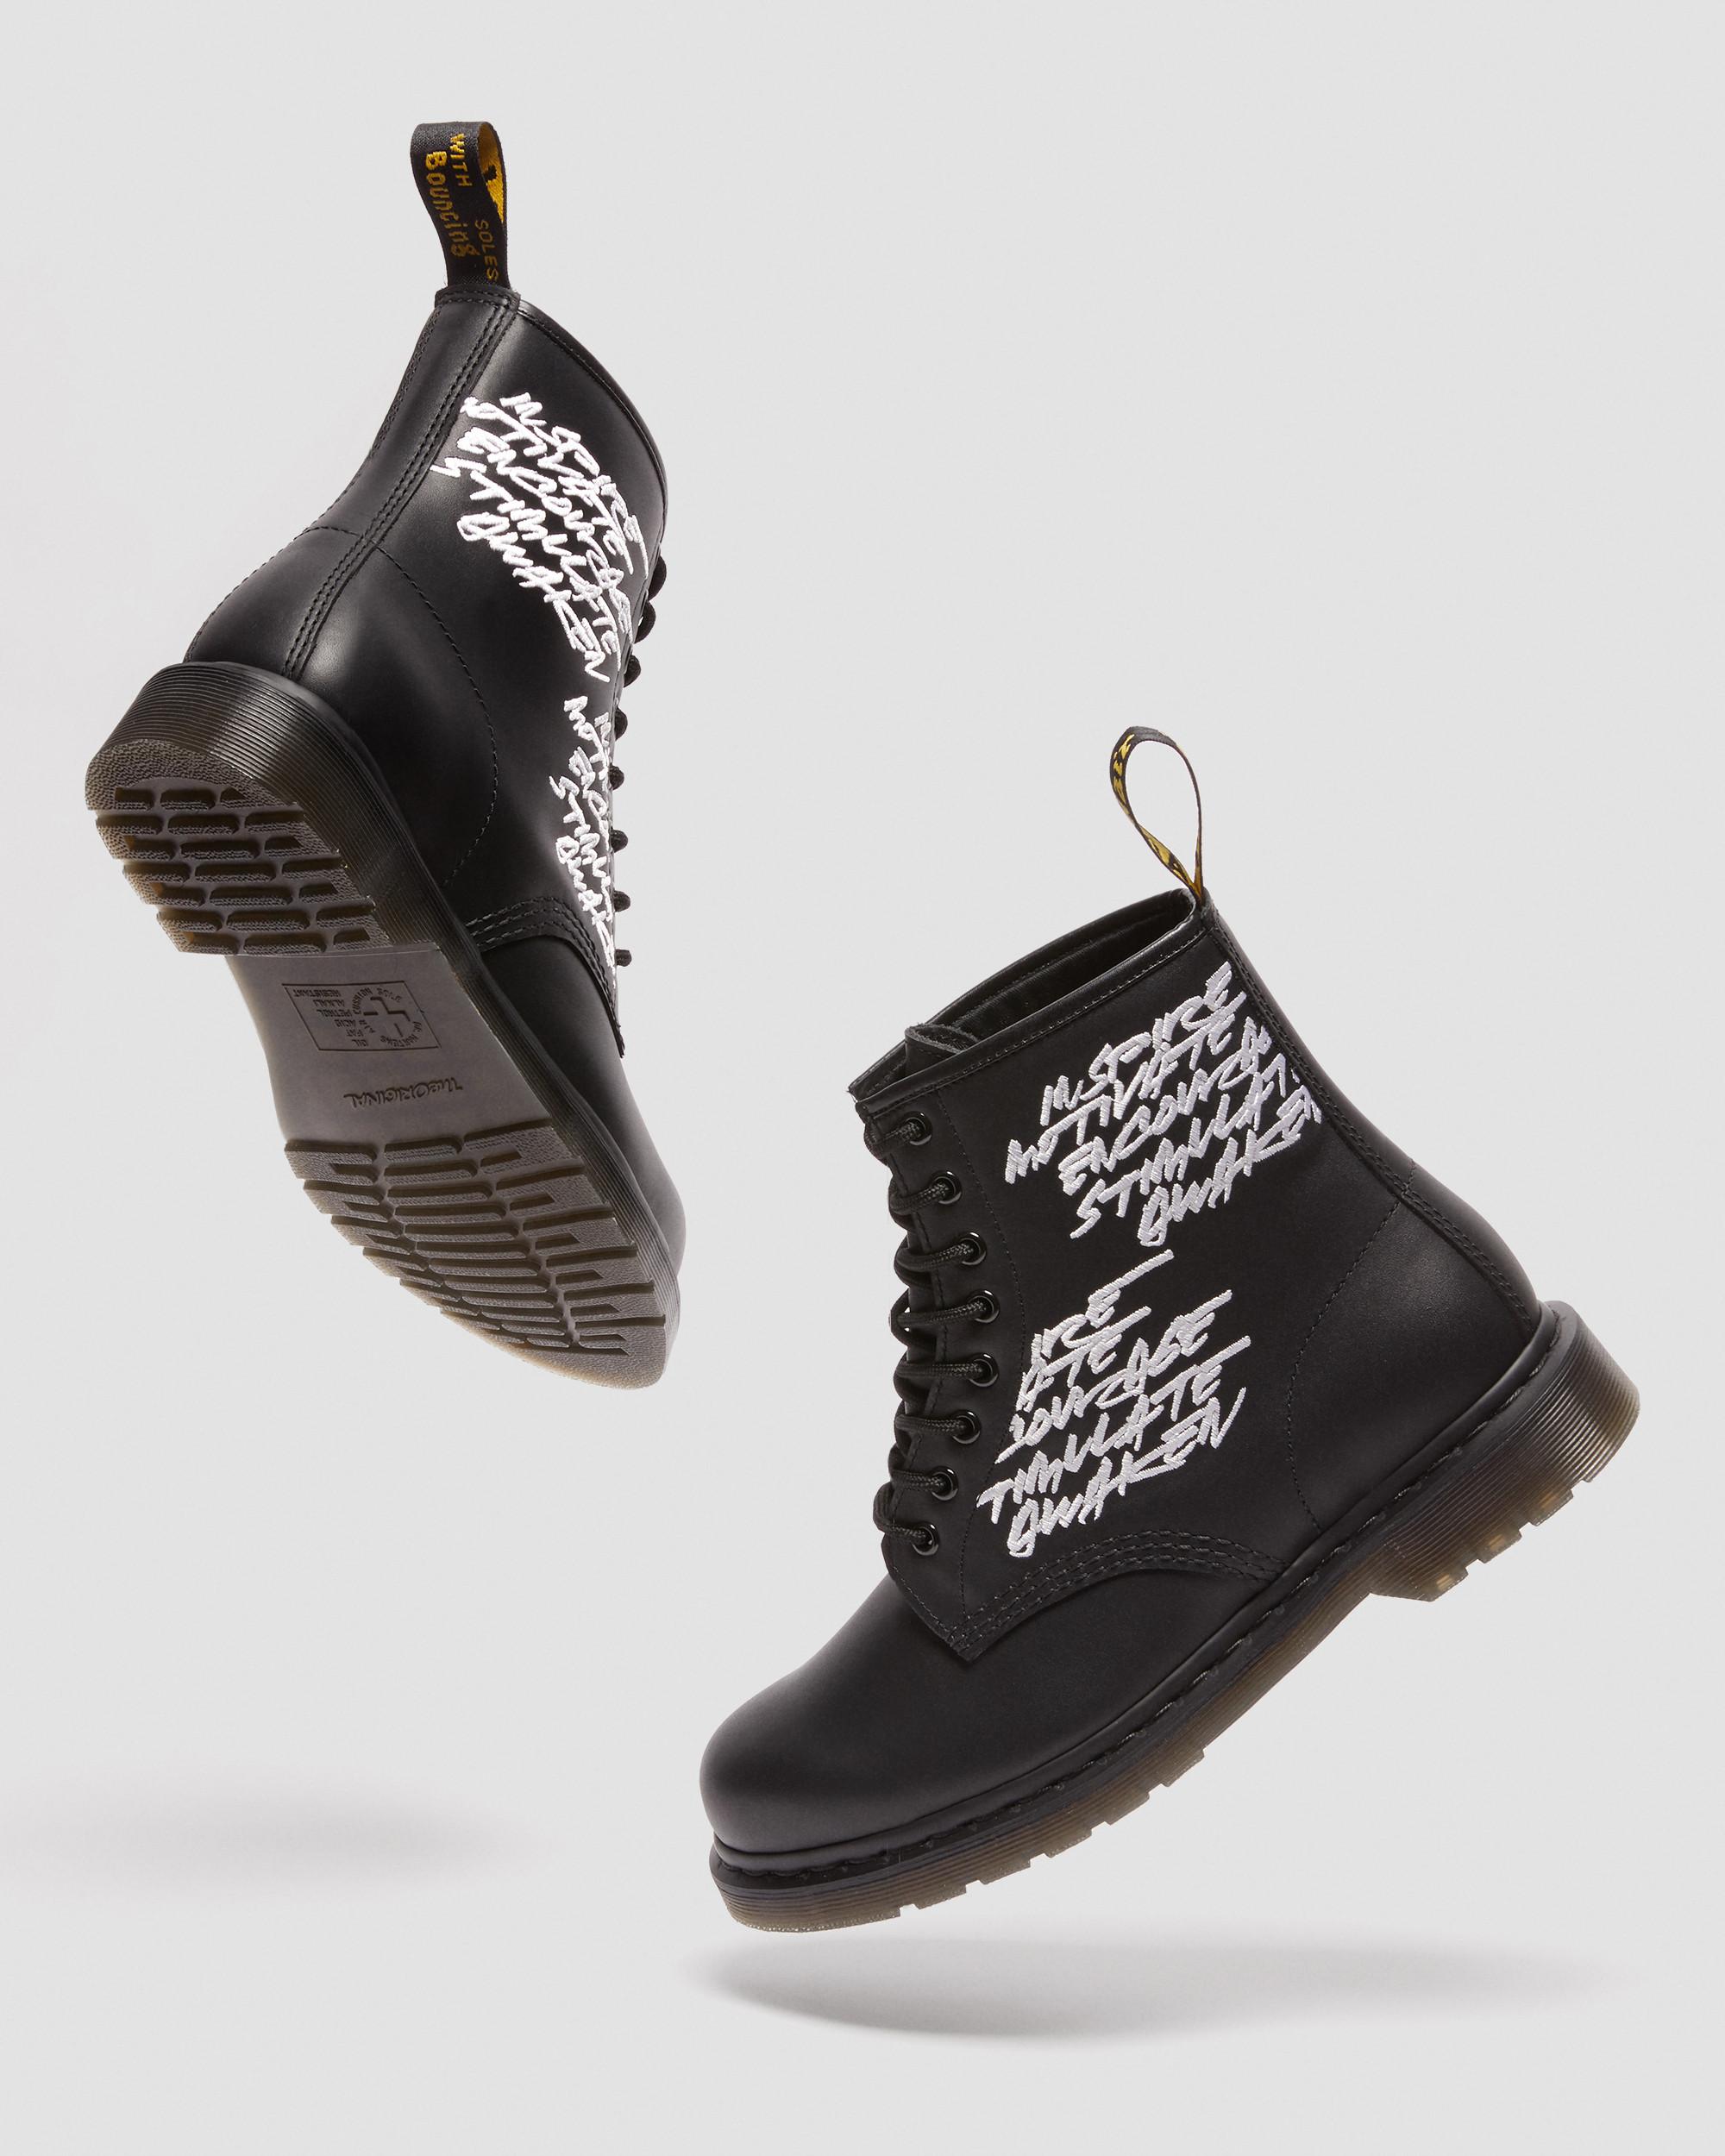 DR MARTENS 1460 Futura Embroidered Leather Lace Up Boots